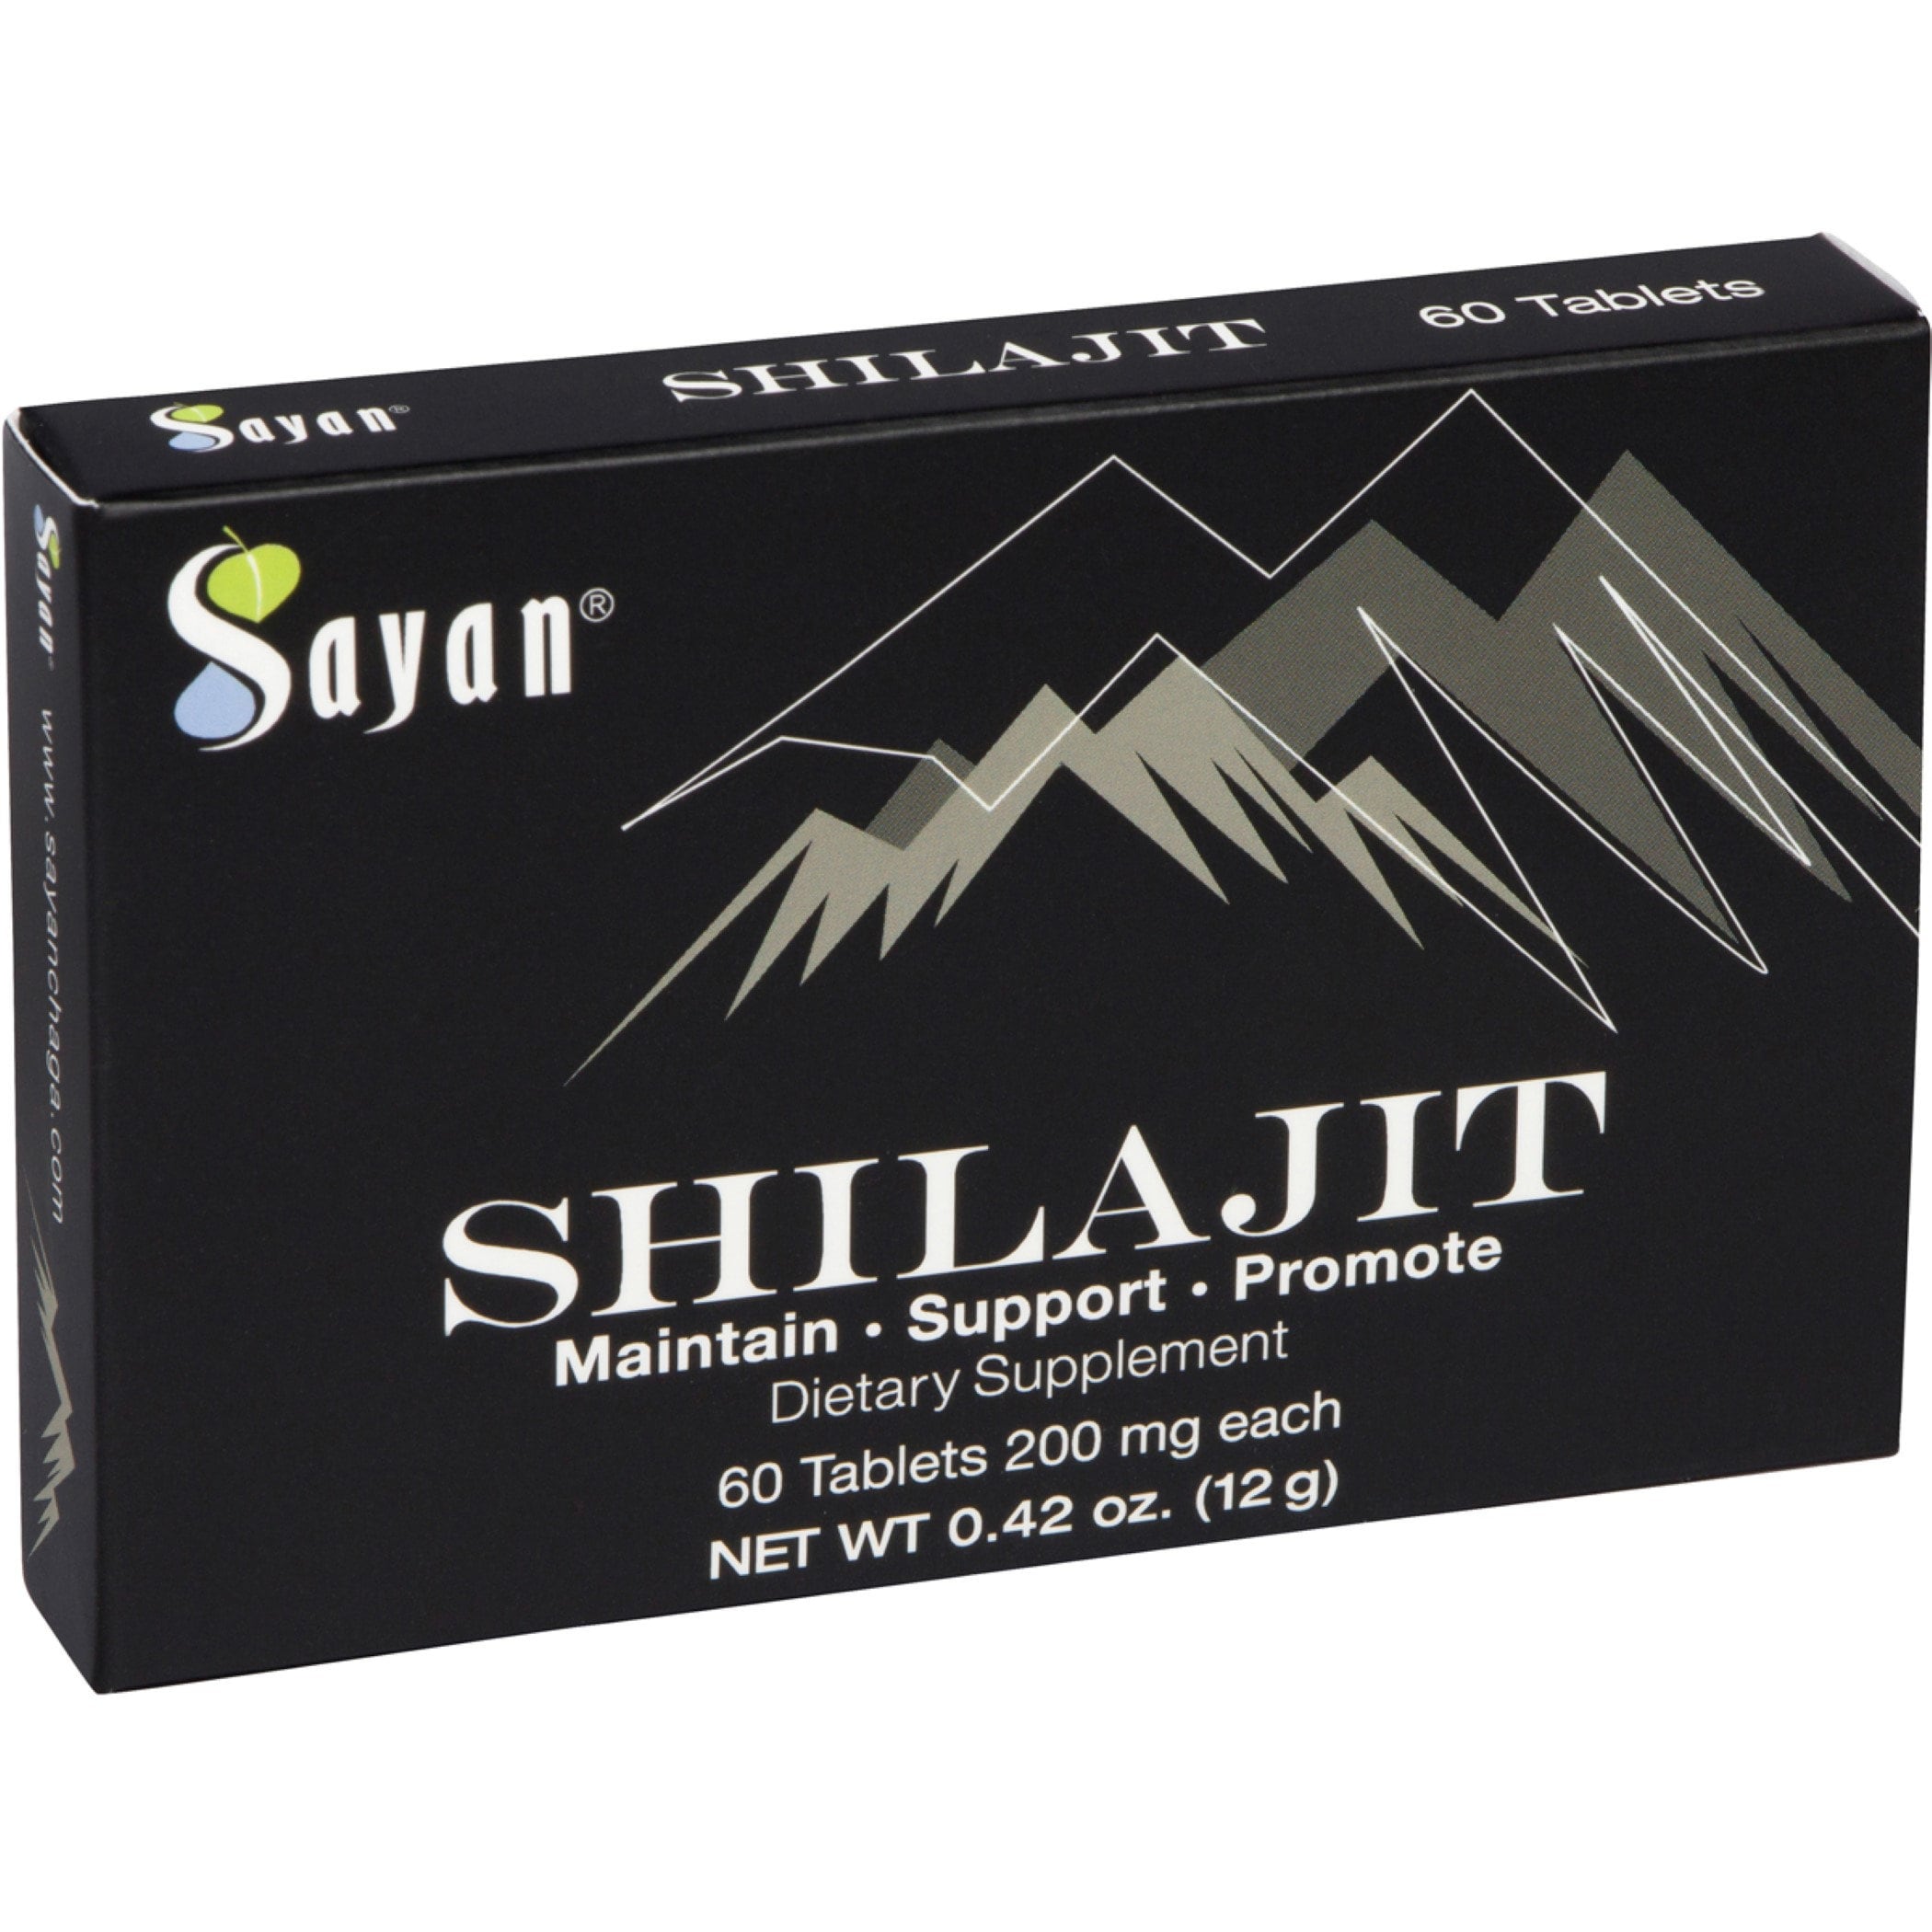 Shilajit Pure Resin Authentic Natural Fresh Organic, Premium Altai Quality  3.5 Oz/ 100g, 160 Servings / 5 Months Supply 